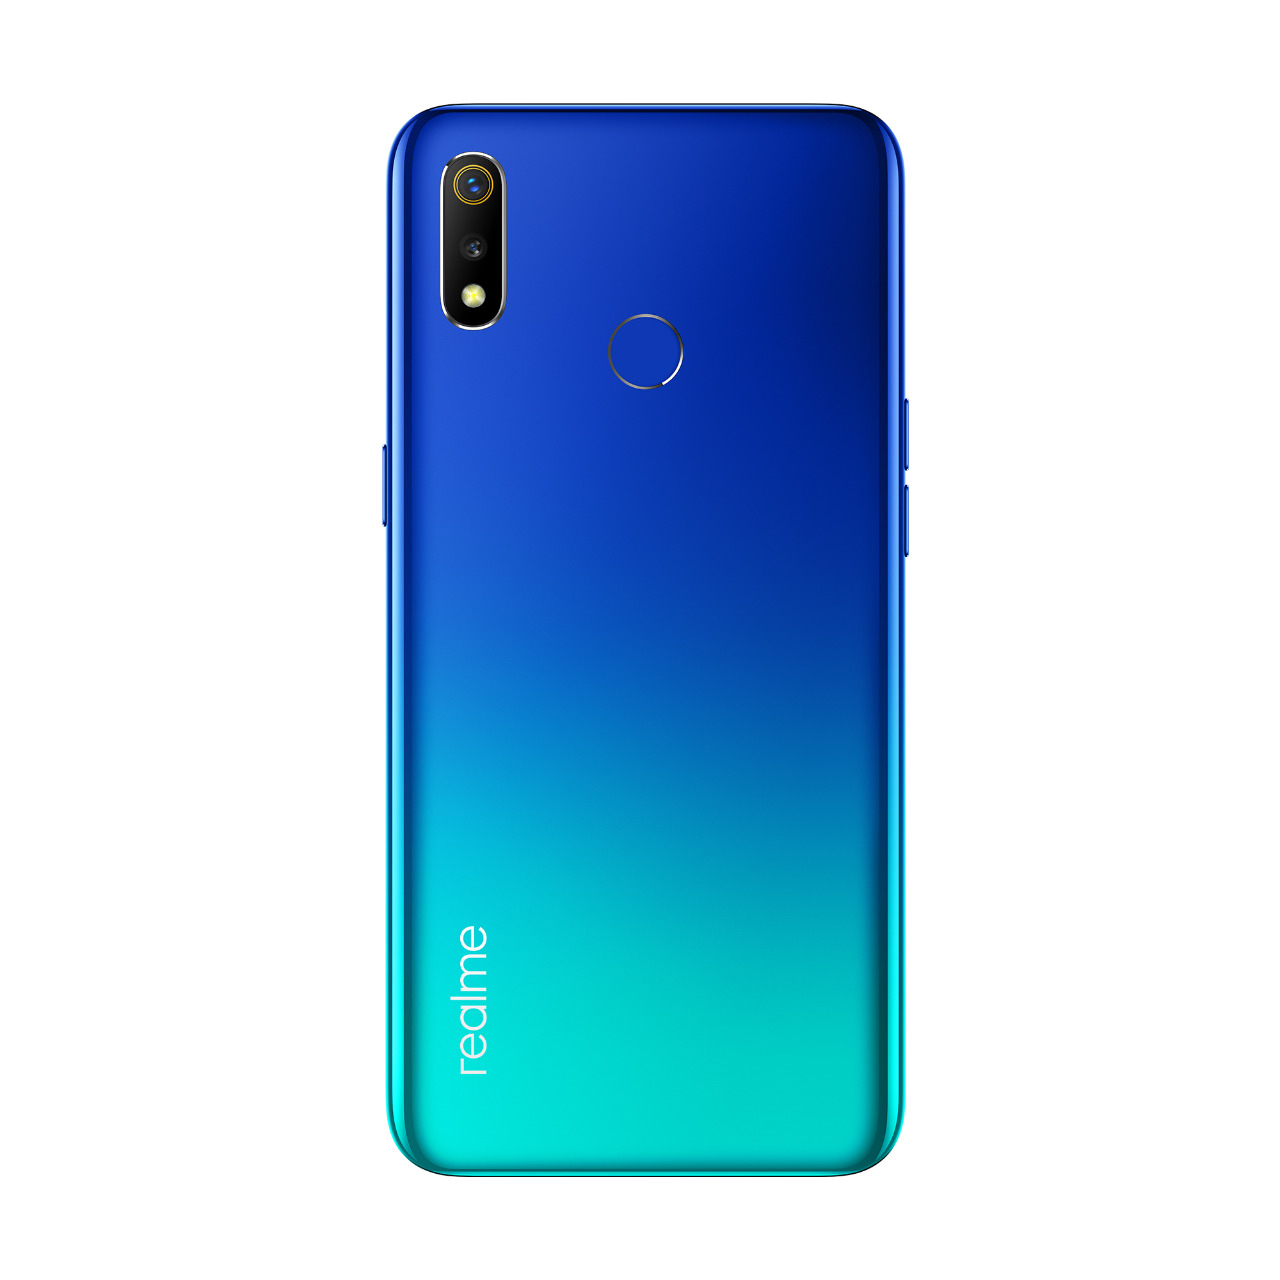 Realme 3 where Power meets Style for the Youth of the Nation